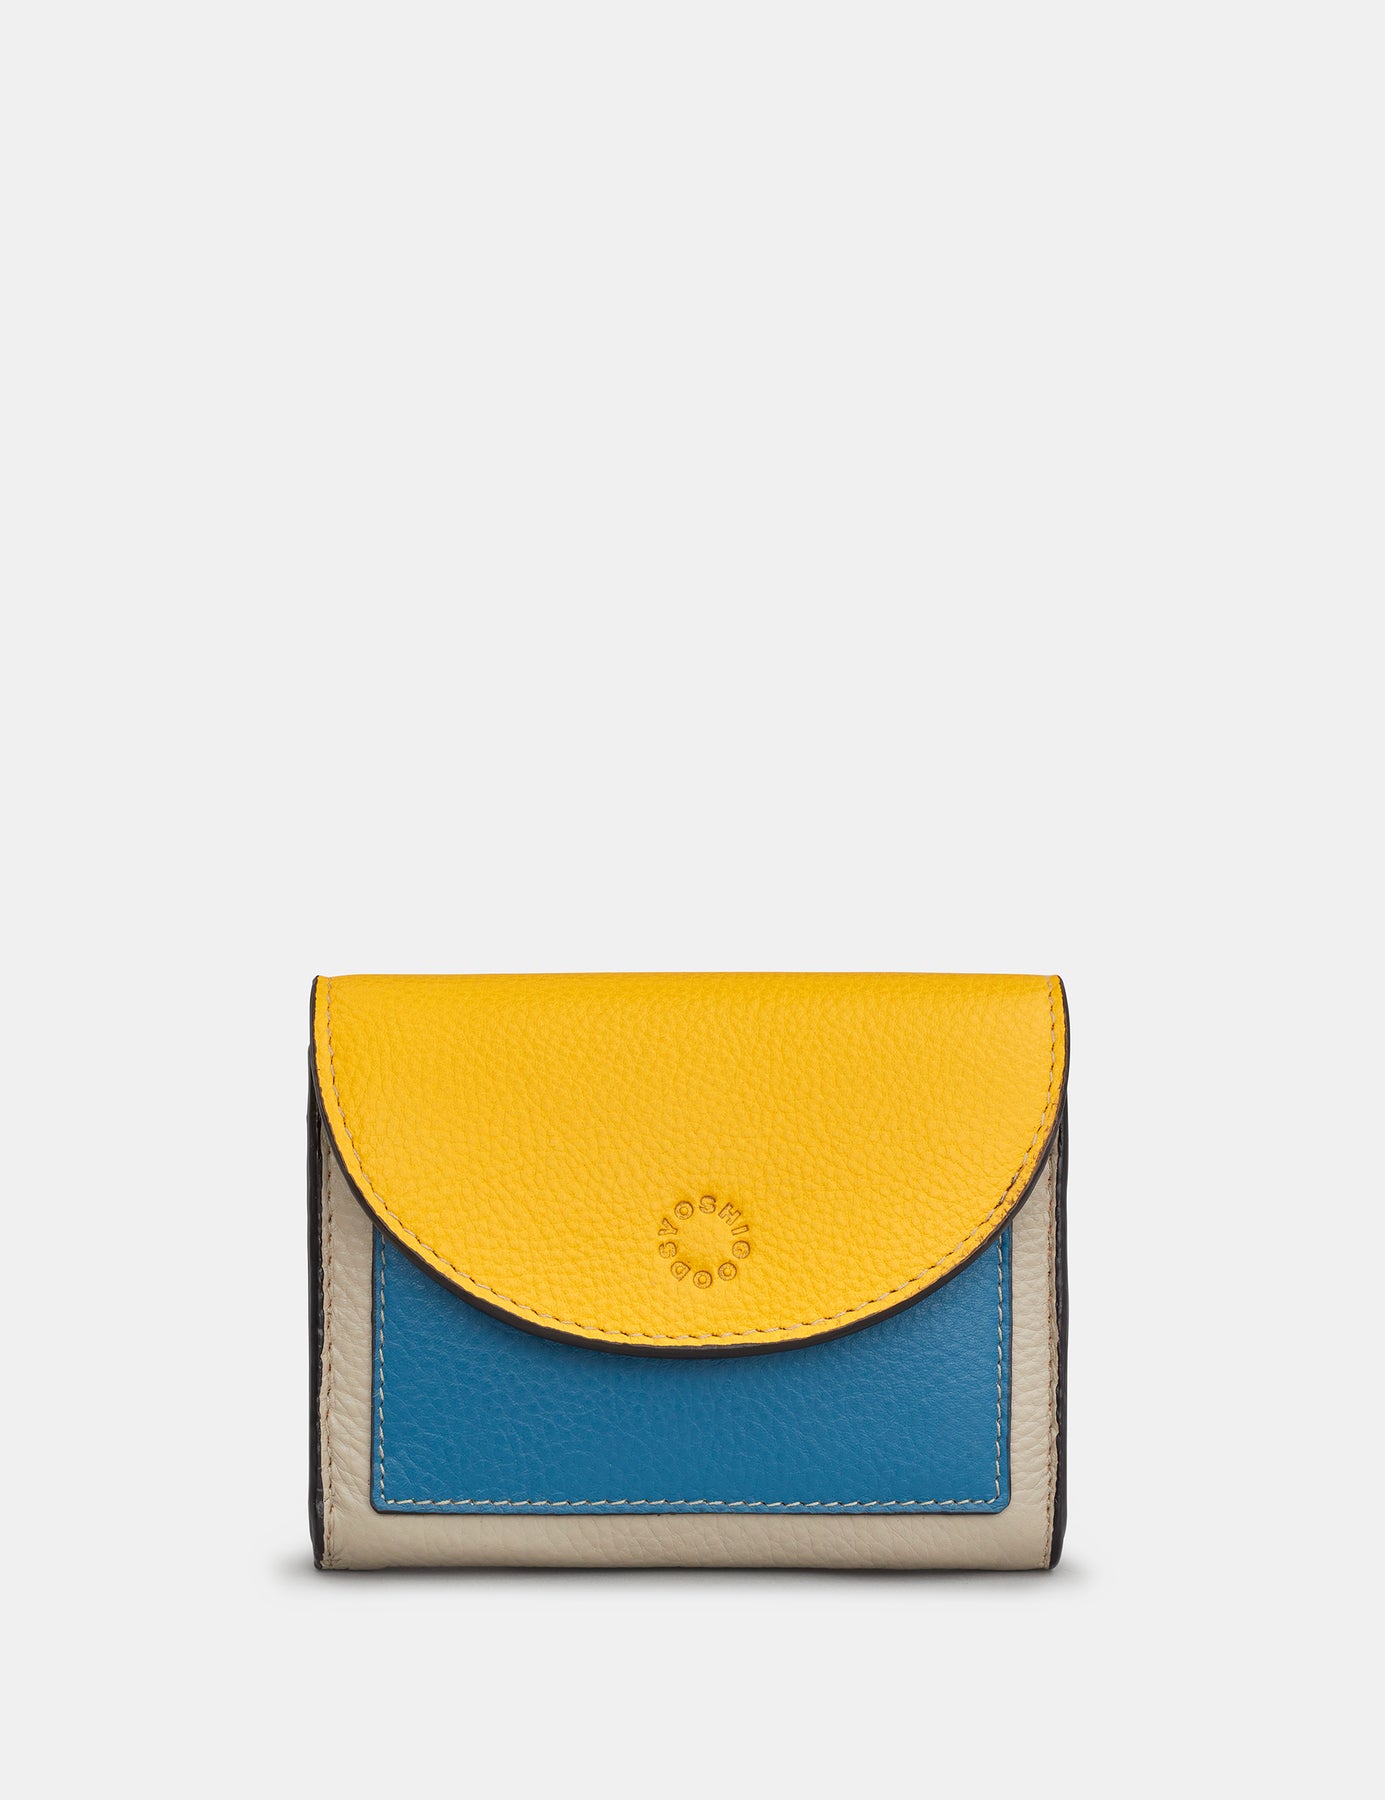 Blue jean shoulder zipper purse with a thin and elegant yellow leather cord  - Marina Porcini